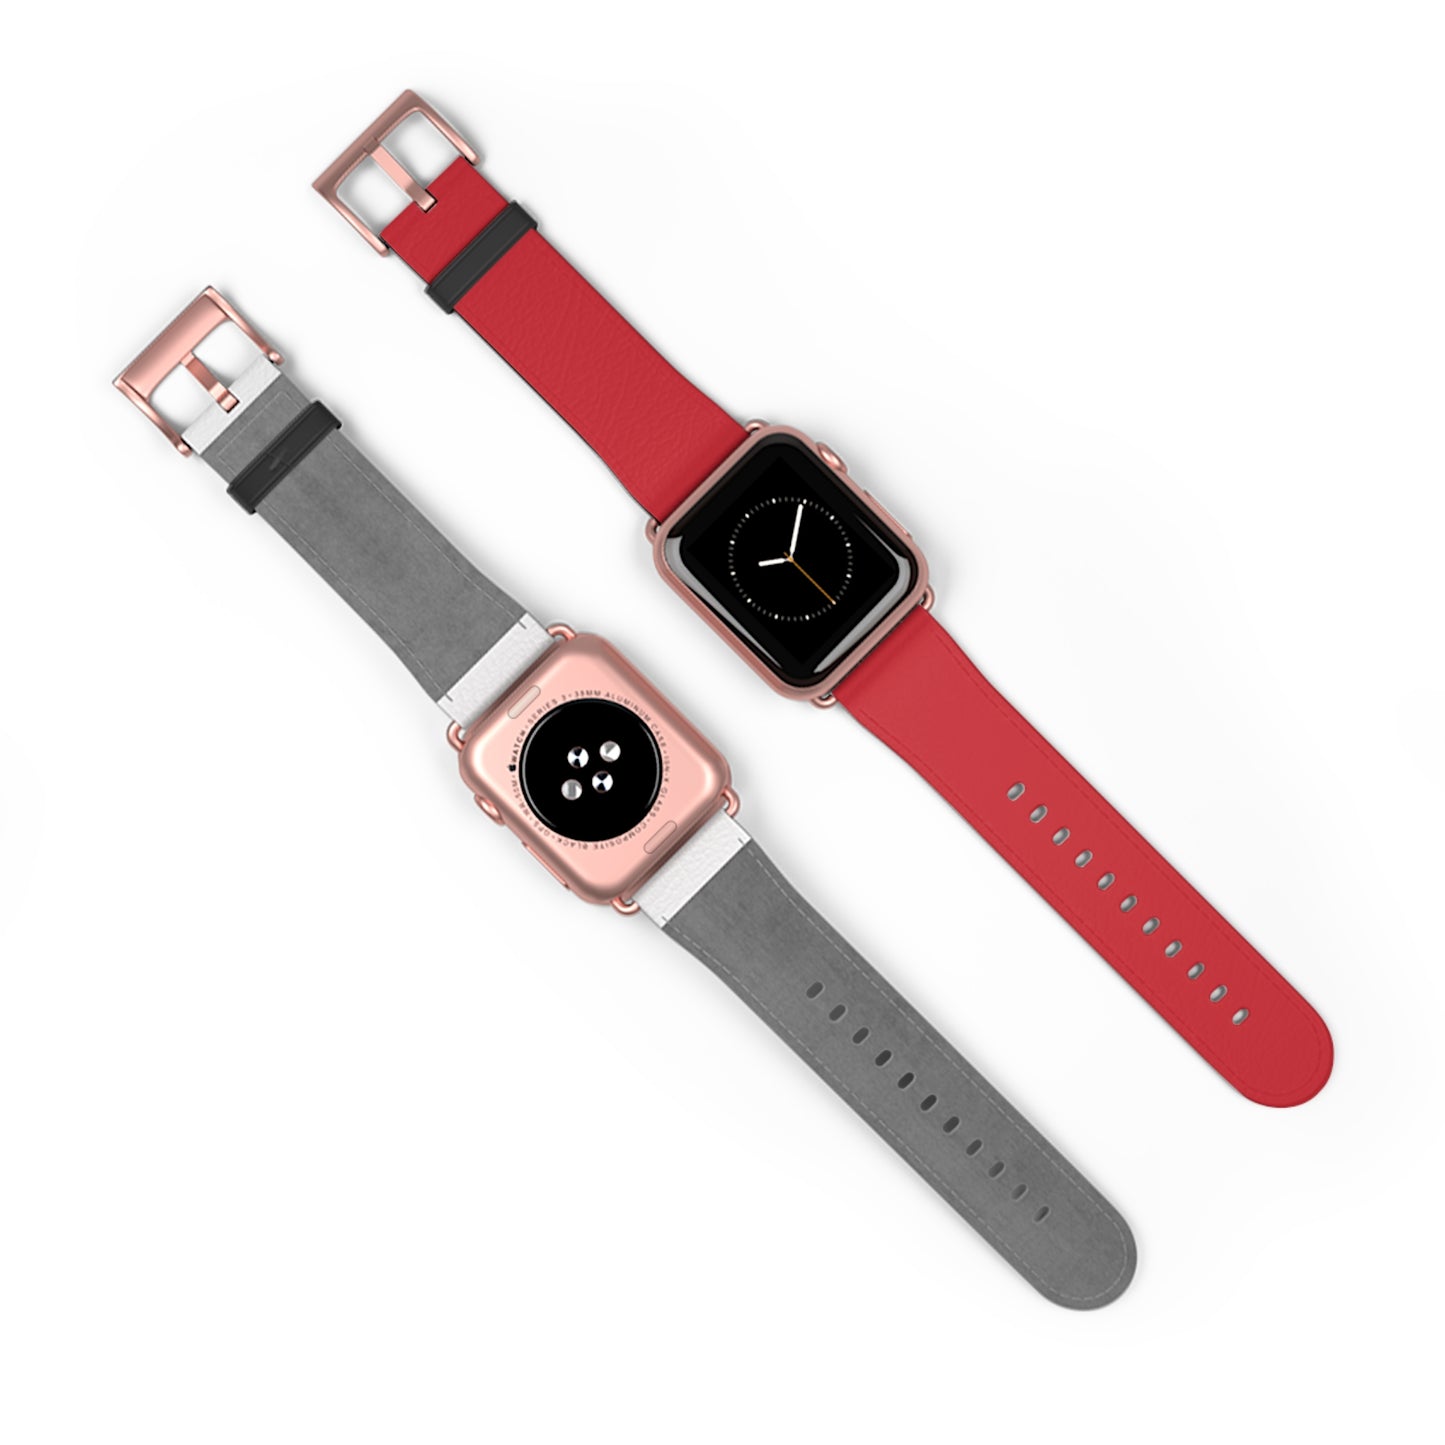 RED APPLE® WATCH BAND- PANTONE® 186